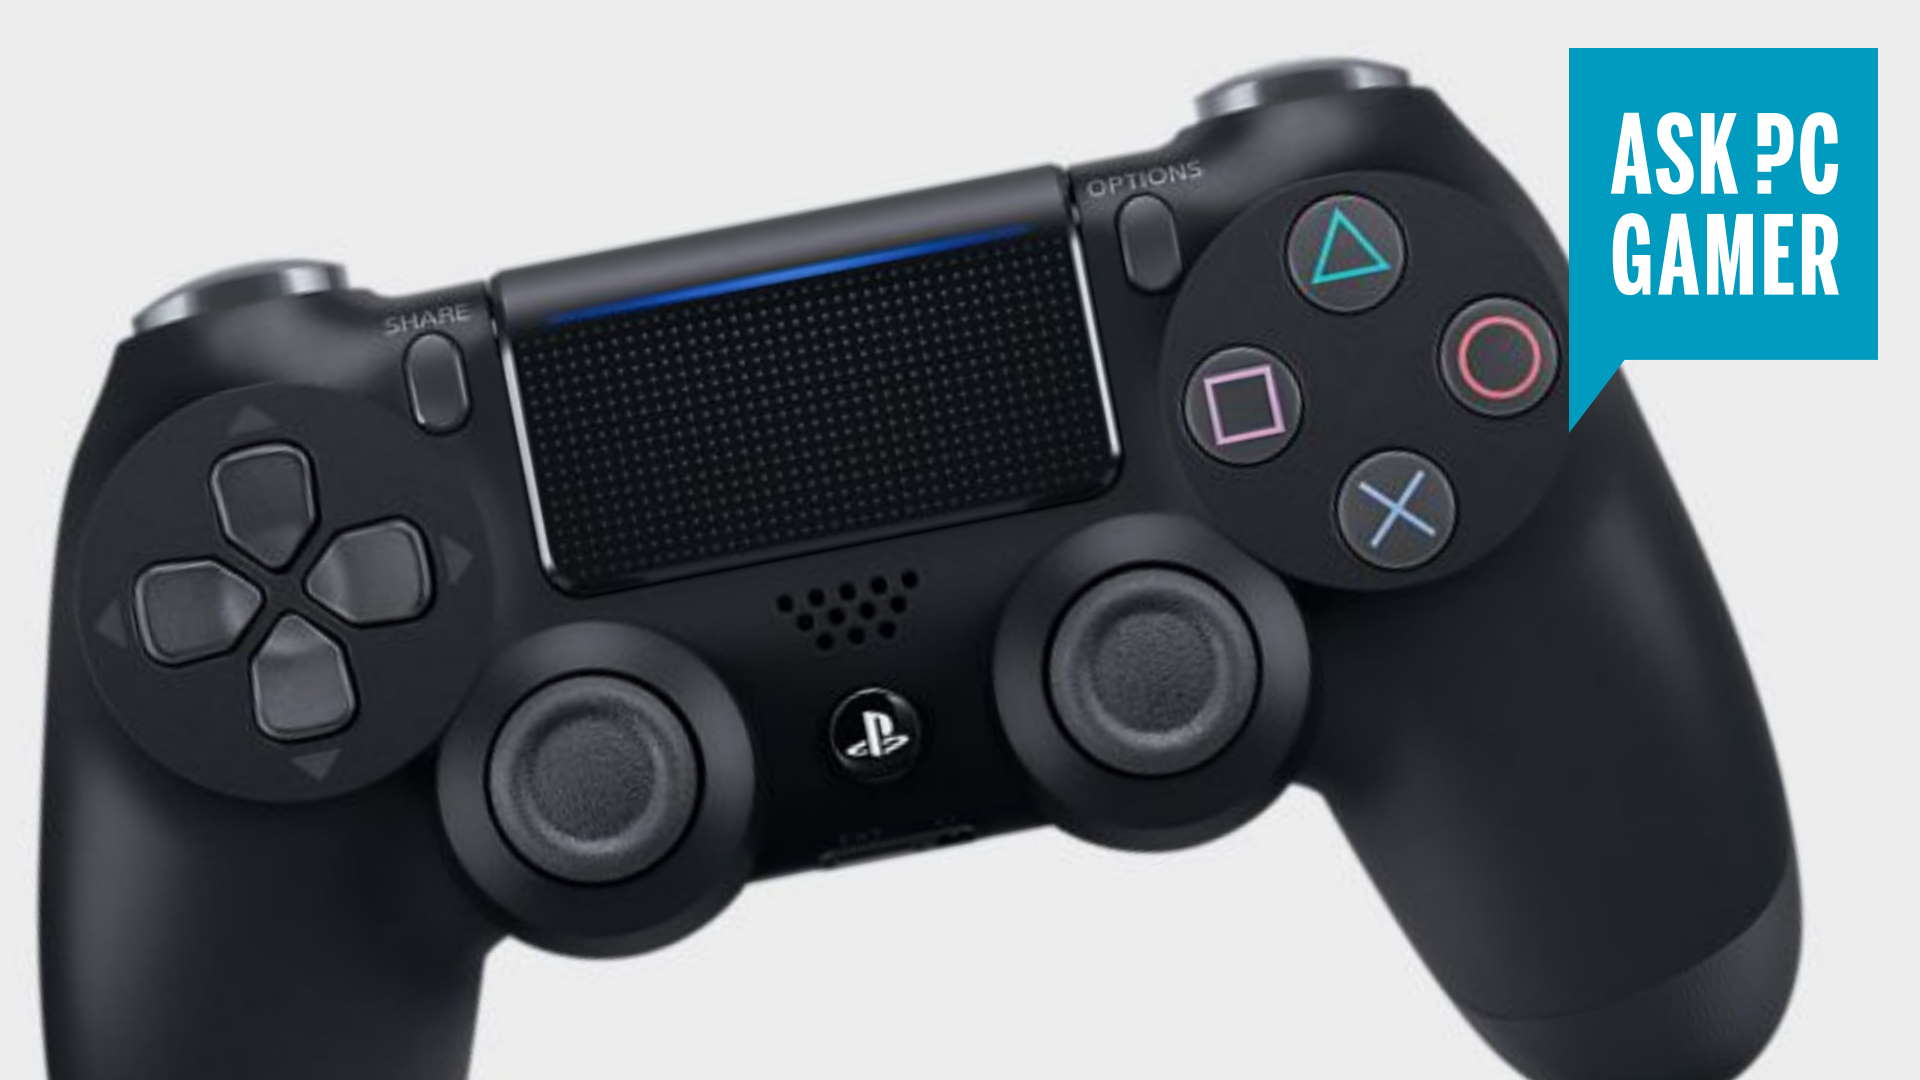 Wolkenkrabber Picasso nogmaals How to use a PS4 controller on PC: | PC Gamer